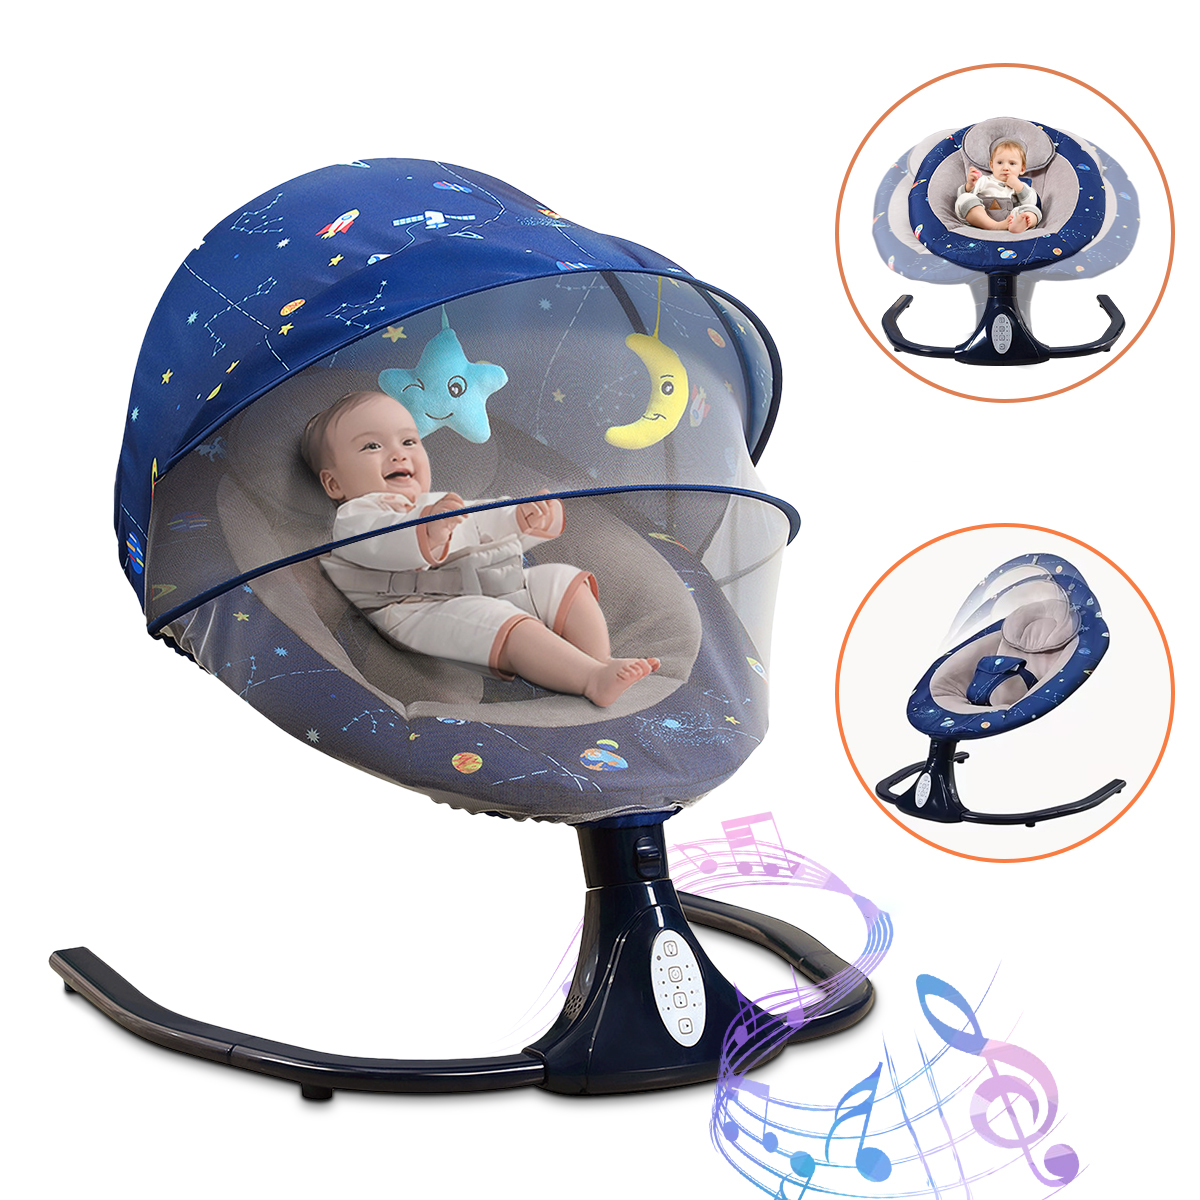 HAOUUCYIN Baby Swing for Infants, Newborn Electric Swing Chair with 4 Gears & Time & Music, Blue - image 1 of 12